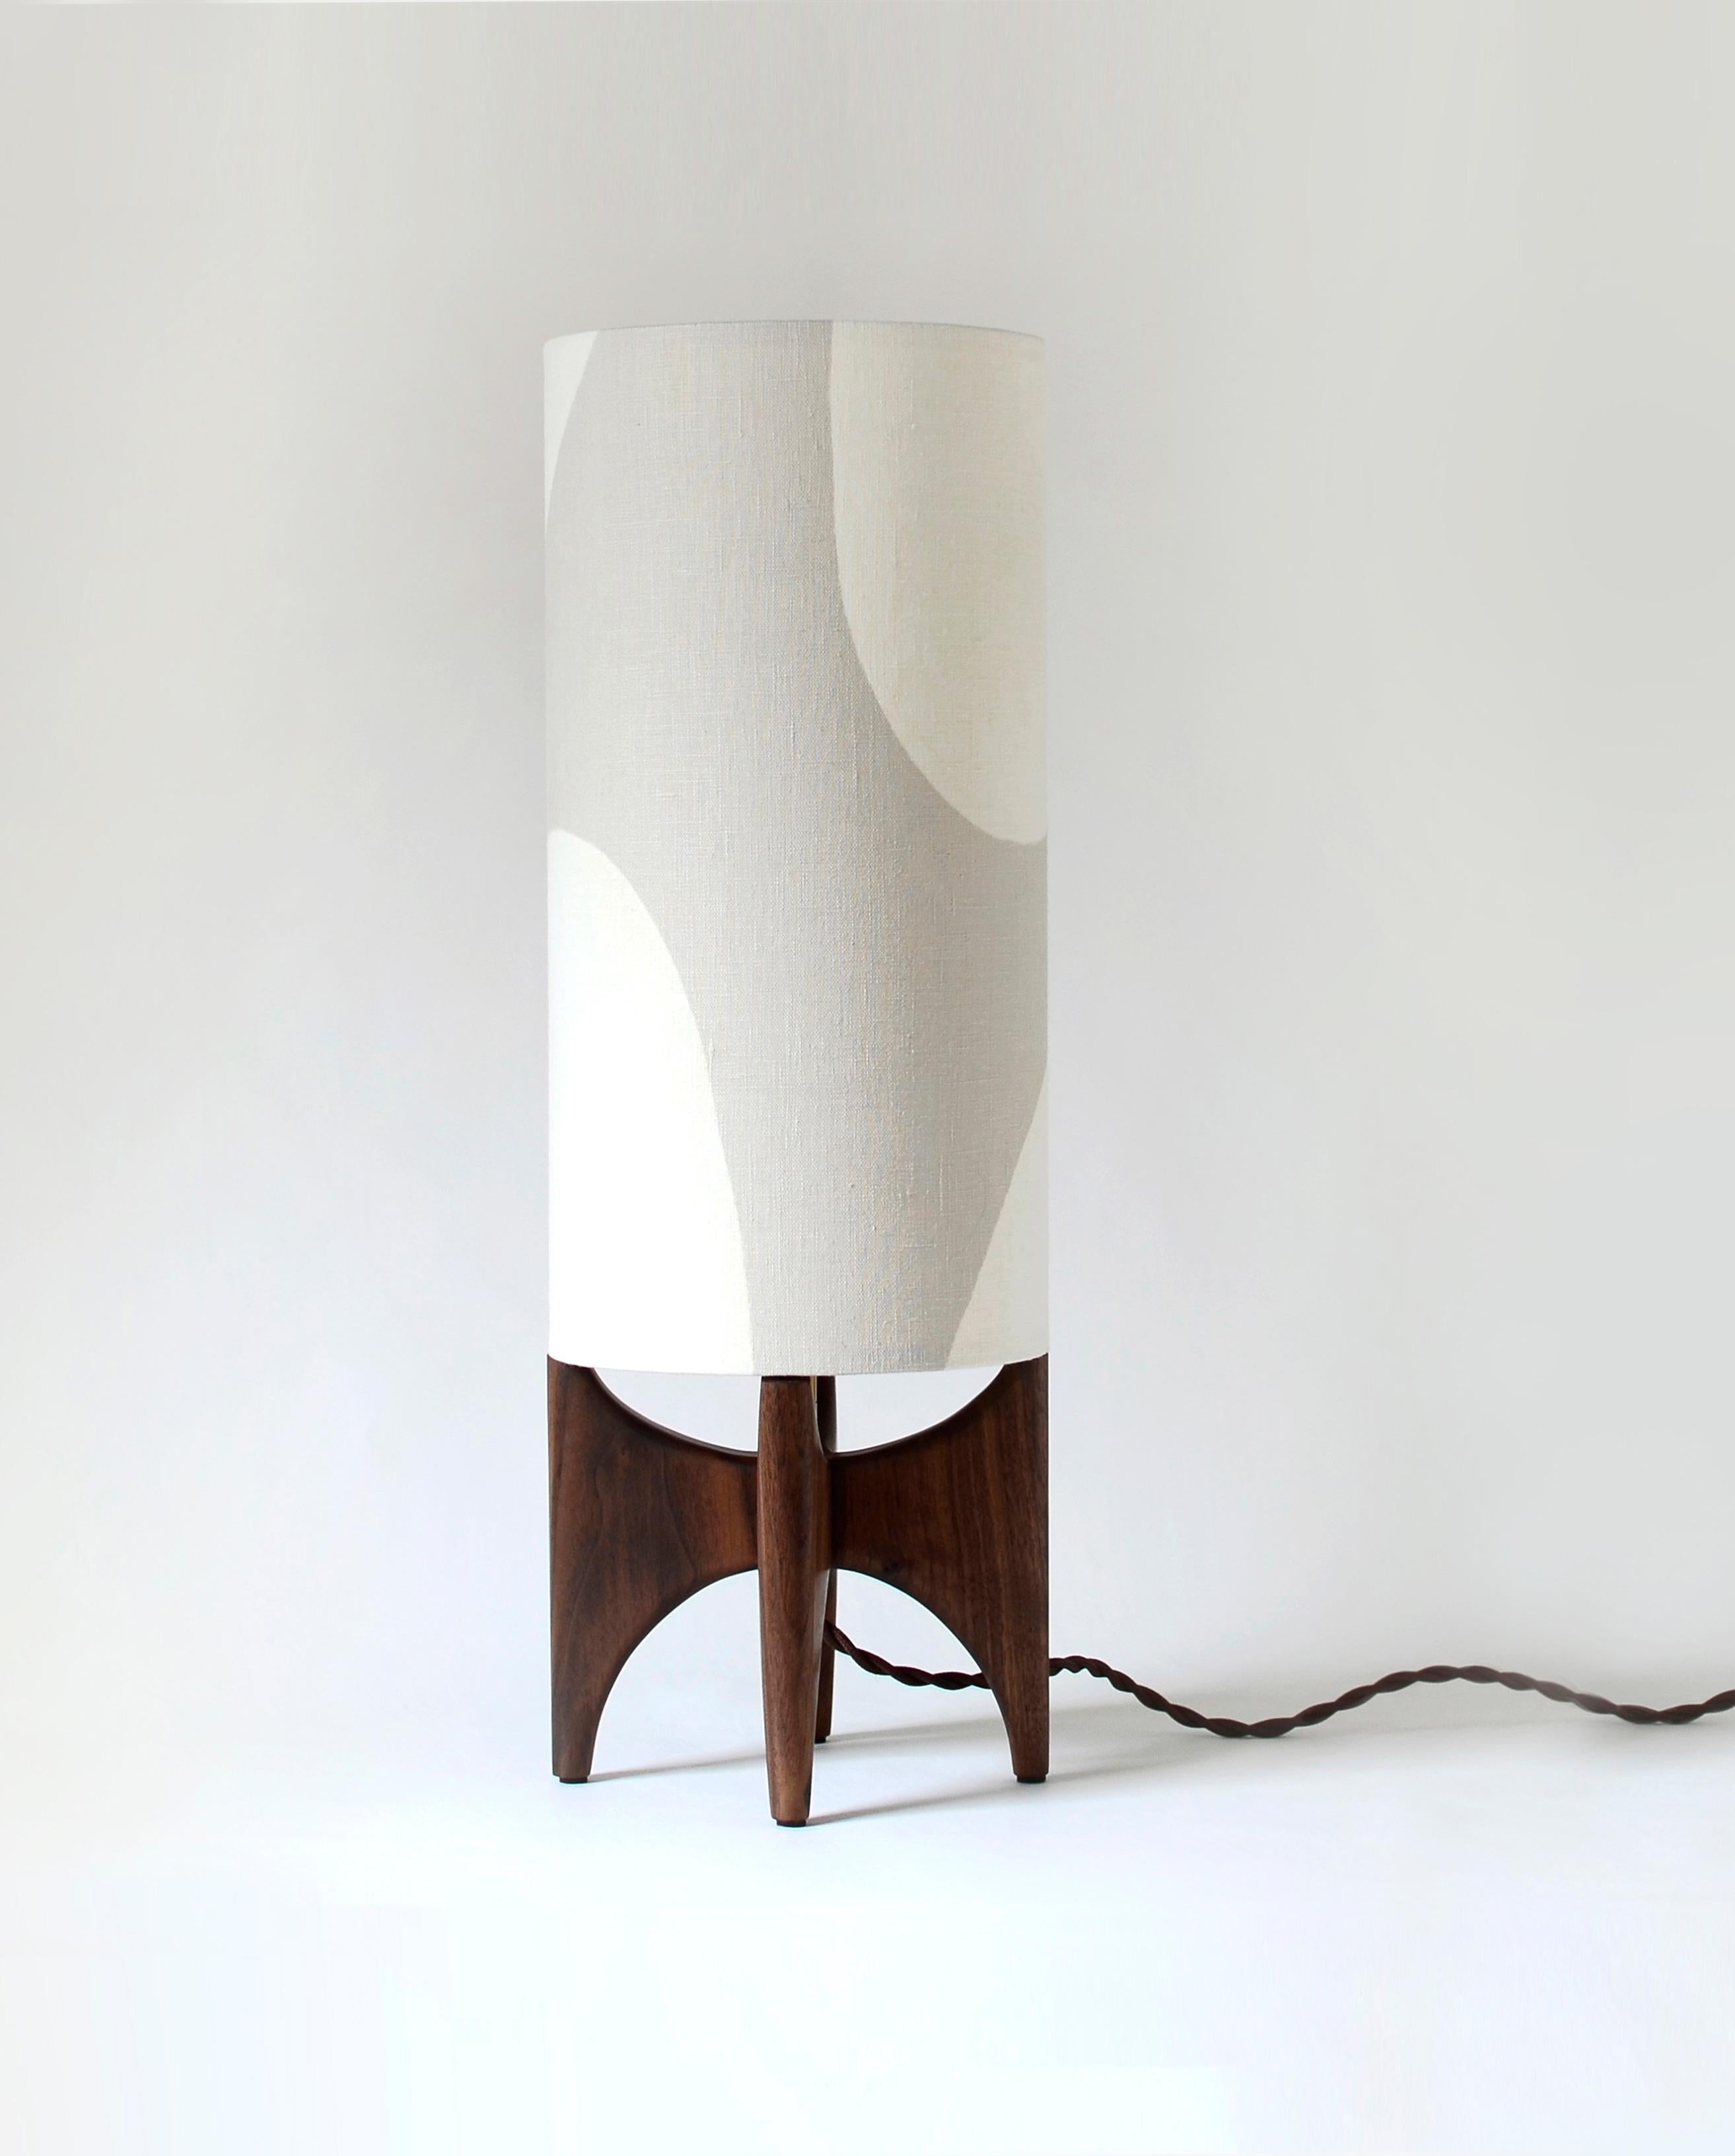 With a Modern style, this table lamp combines clean and curvilinear forms to create a unique piece. Our Luma Collection plays with simple shapes, exploring positive and negative space to create a unique and modern lampshade design, paired with a